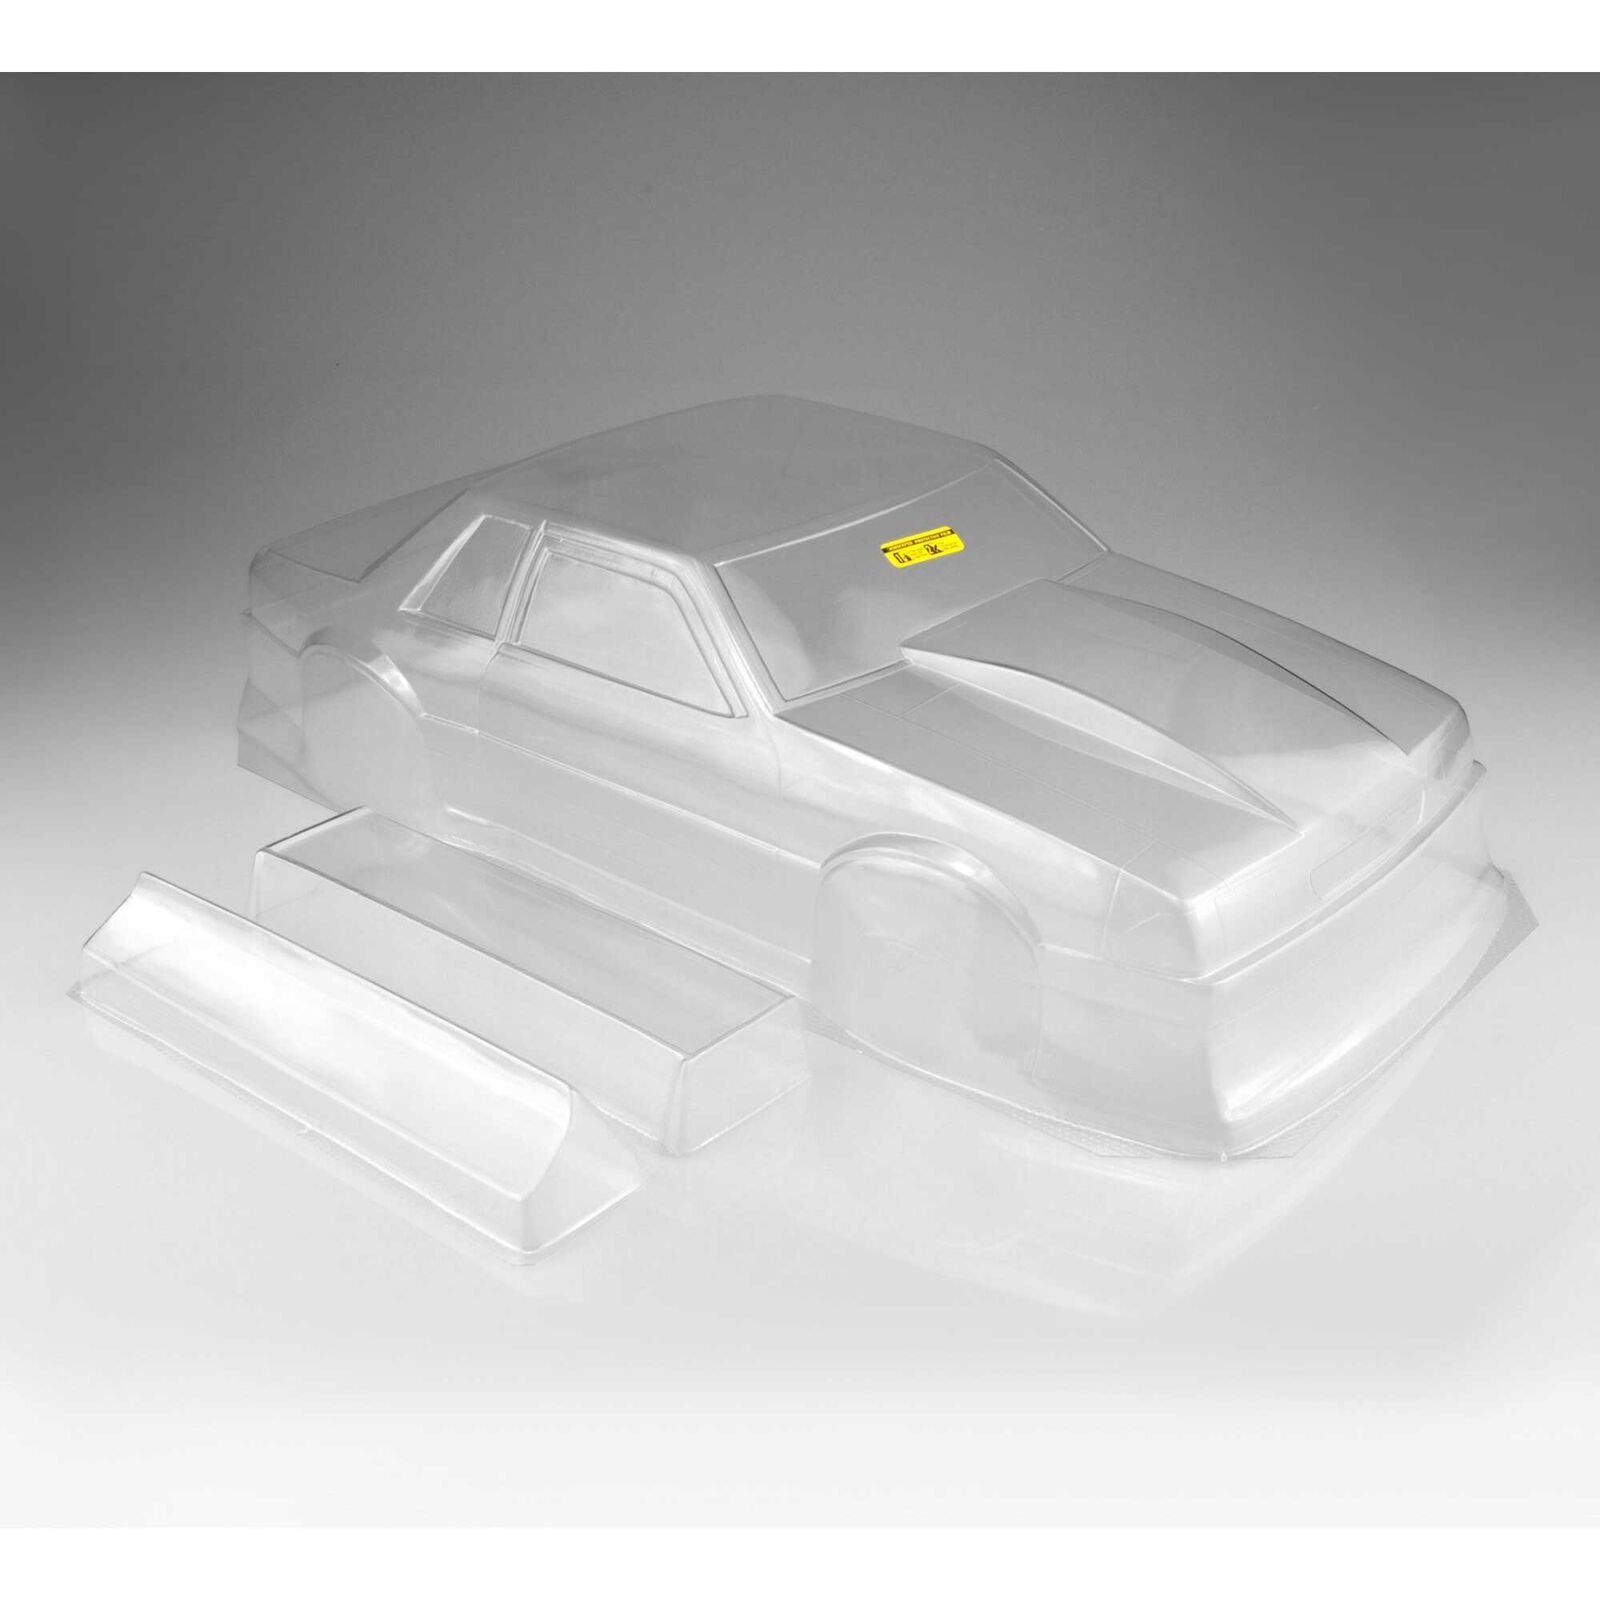 JCONCEPTS 0362 1991 Ford Mustang Fox Clear Body 10.75 Width, 13" Wheelbase